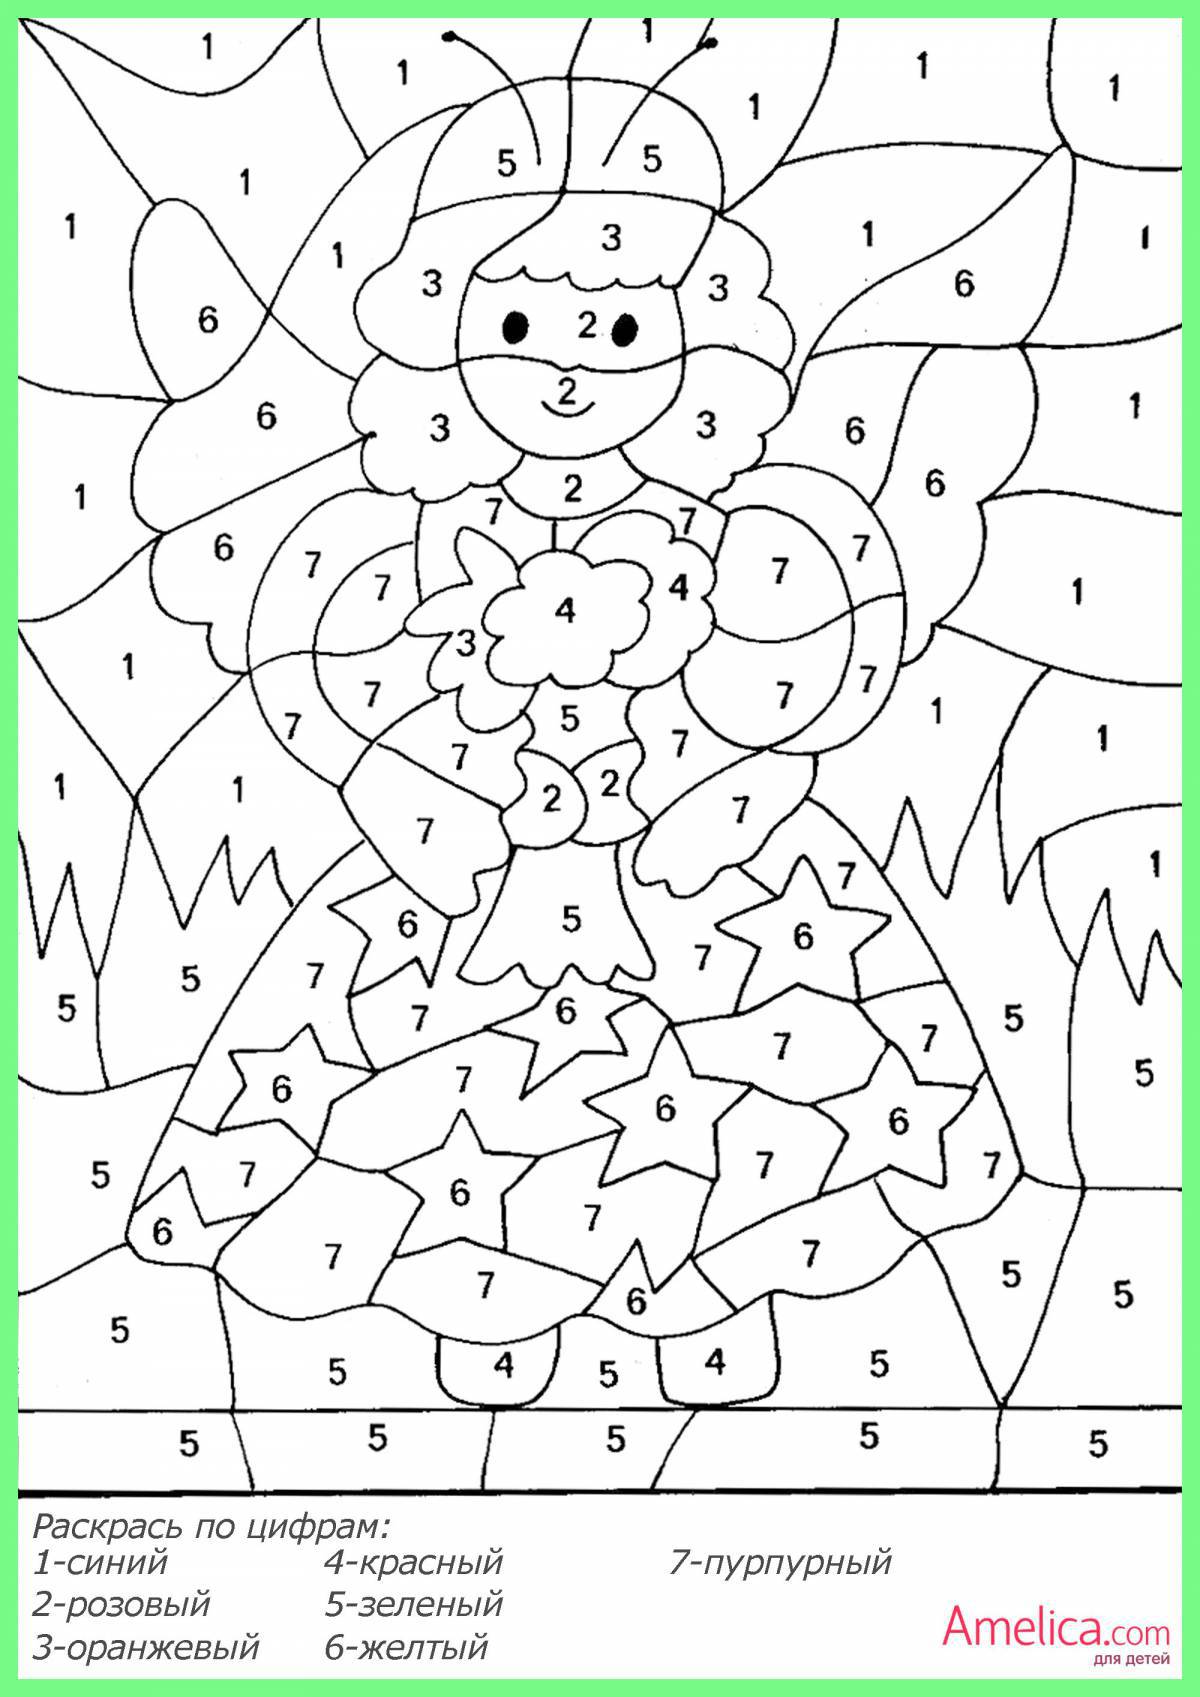 Relaxing coloring by numbers for kids 5-6 years old